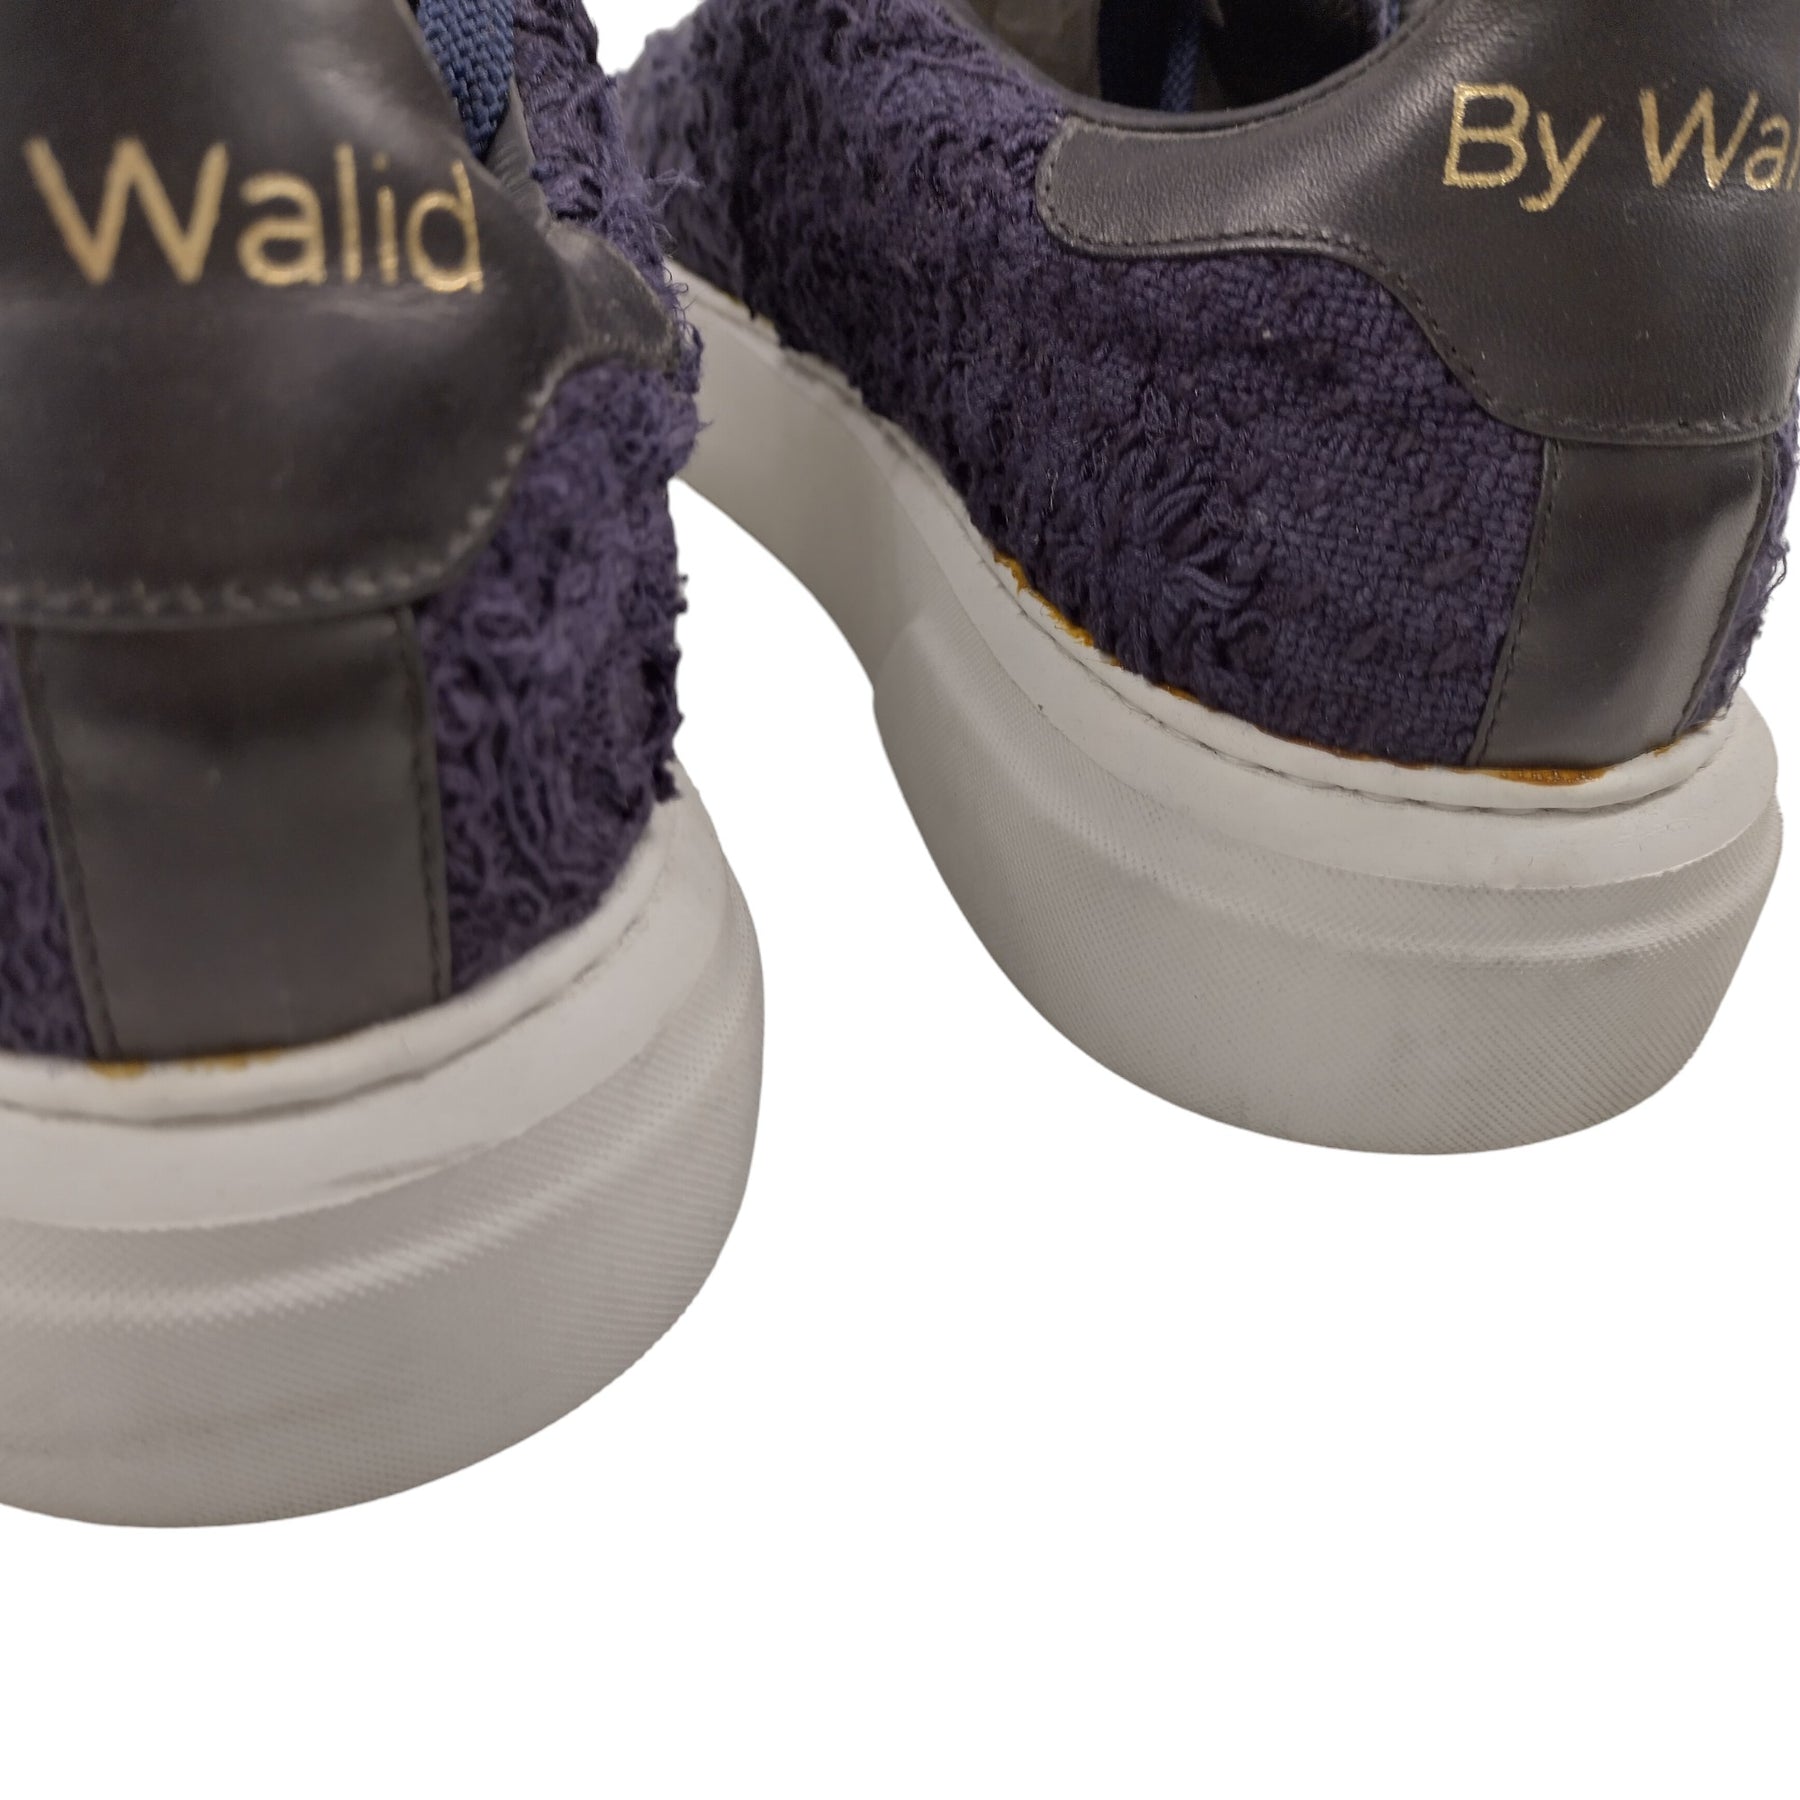 By Walid Navy Lace Sneakers